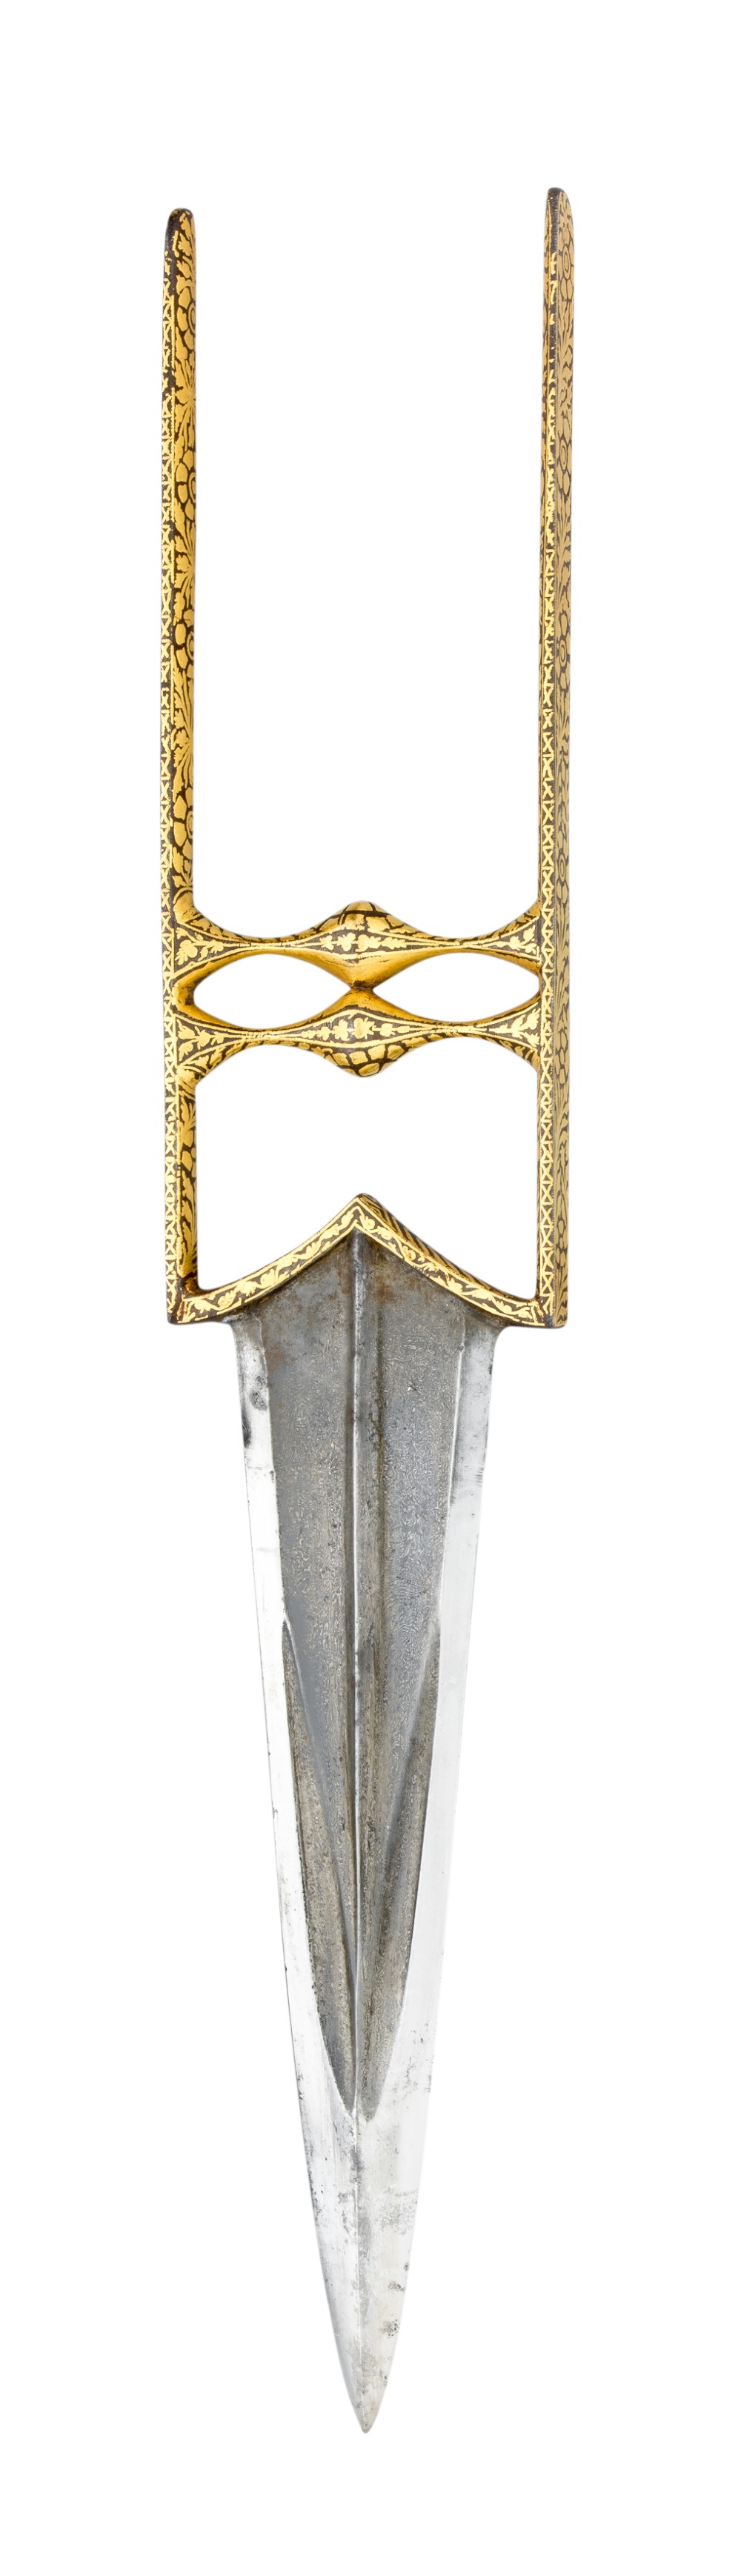 AN INDIAN DAGGER (KATAR), 19TH CENTURY with tapering blade formed with a reinforced tip and a medial